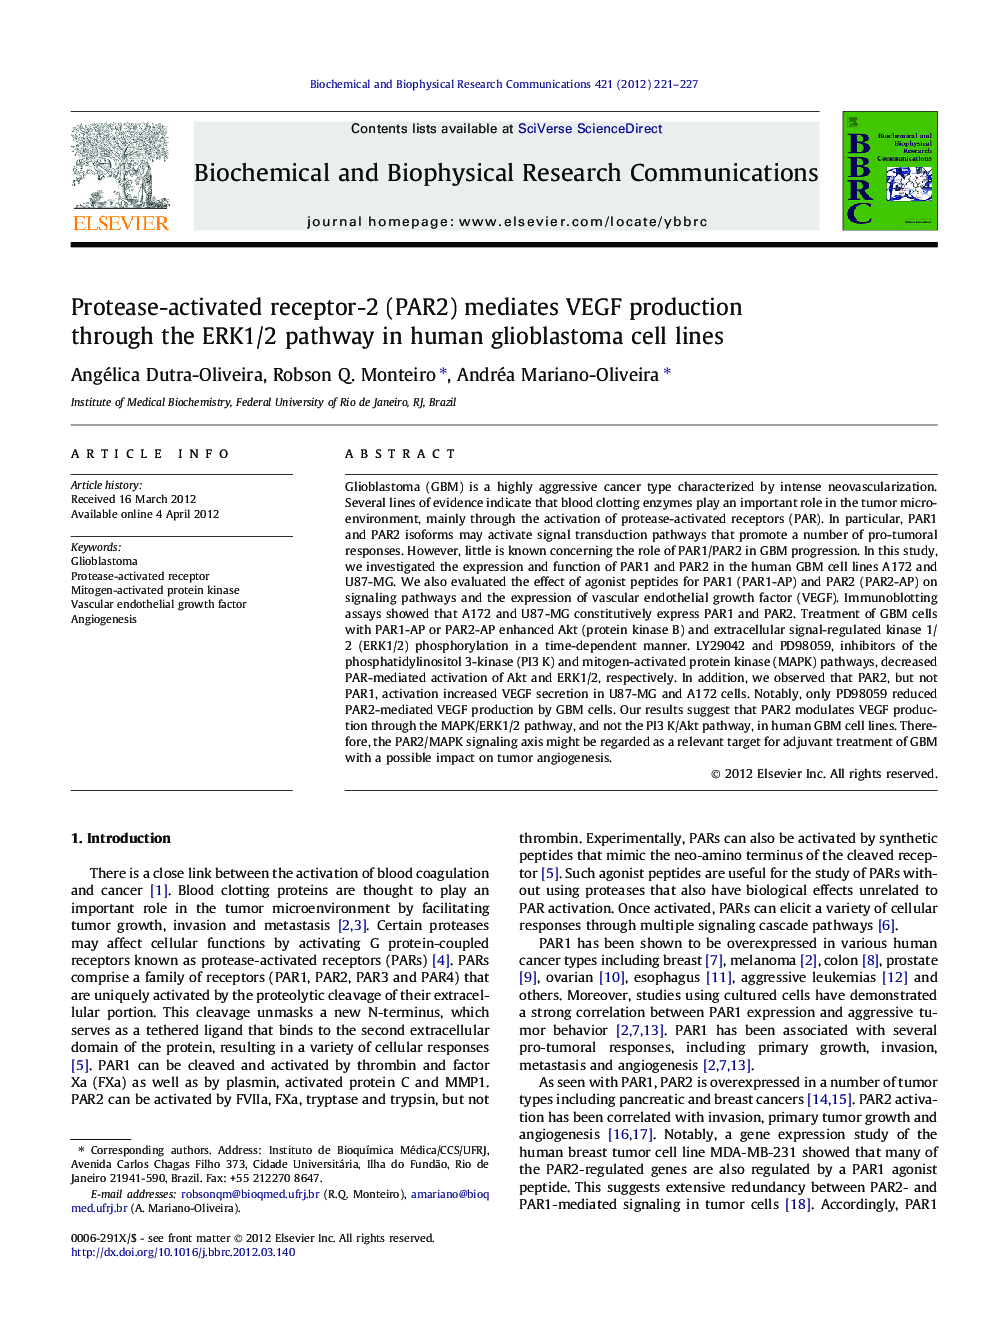 Protease-activated receptor-2 (PAR2) mediates VEGF production through the ERK1/2 pathway in human glioblastoma cell lines